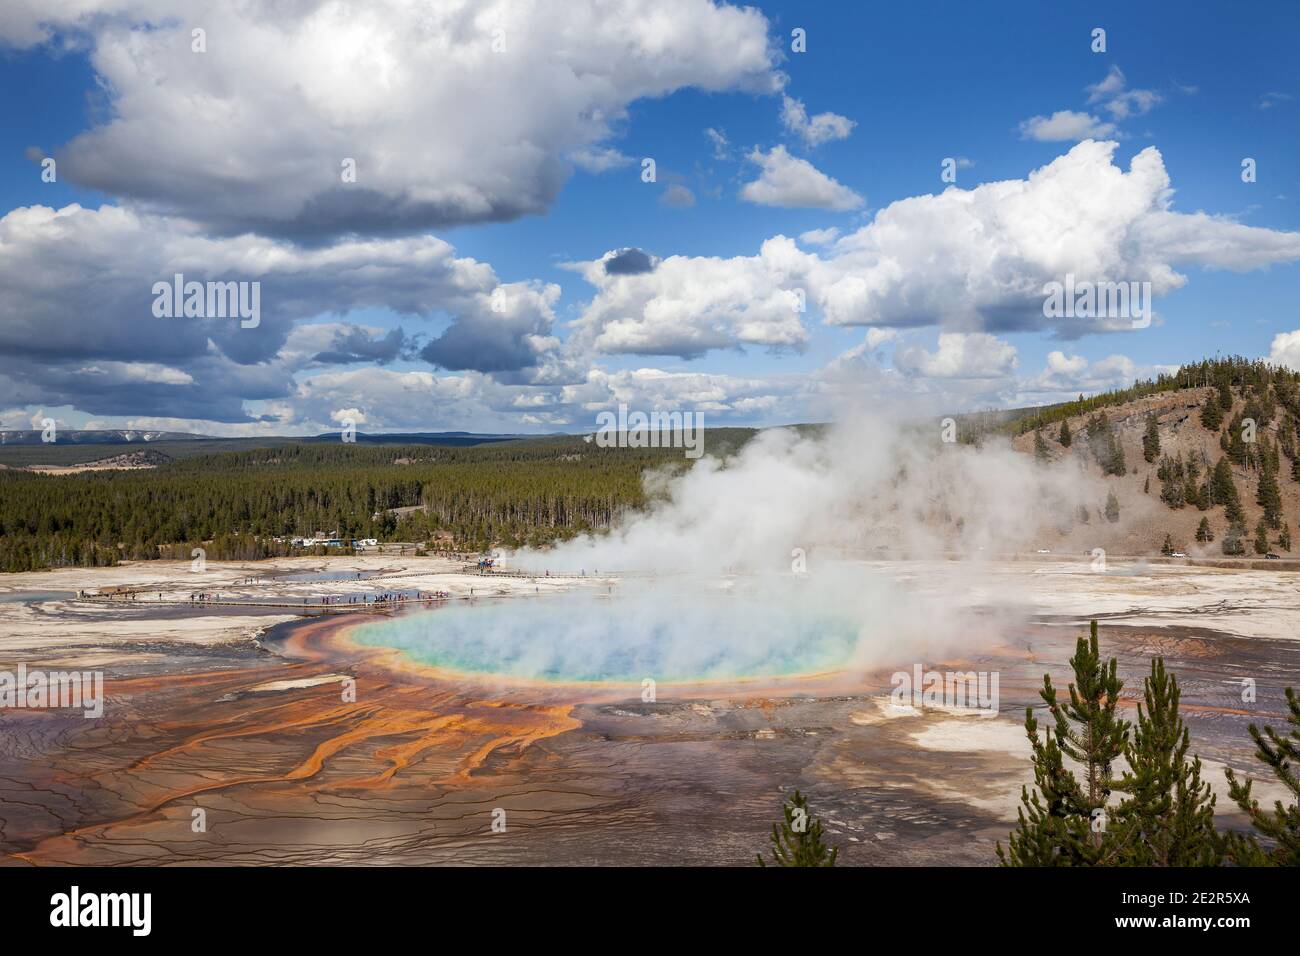 WY02836-00...WYOMING - Grand Prismatic Spring dans le bassin Geyser Midway du parc national Yelleostone. Banque D'Images